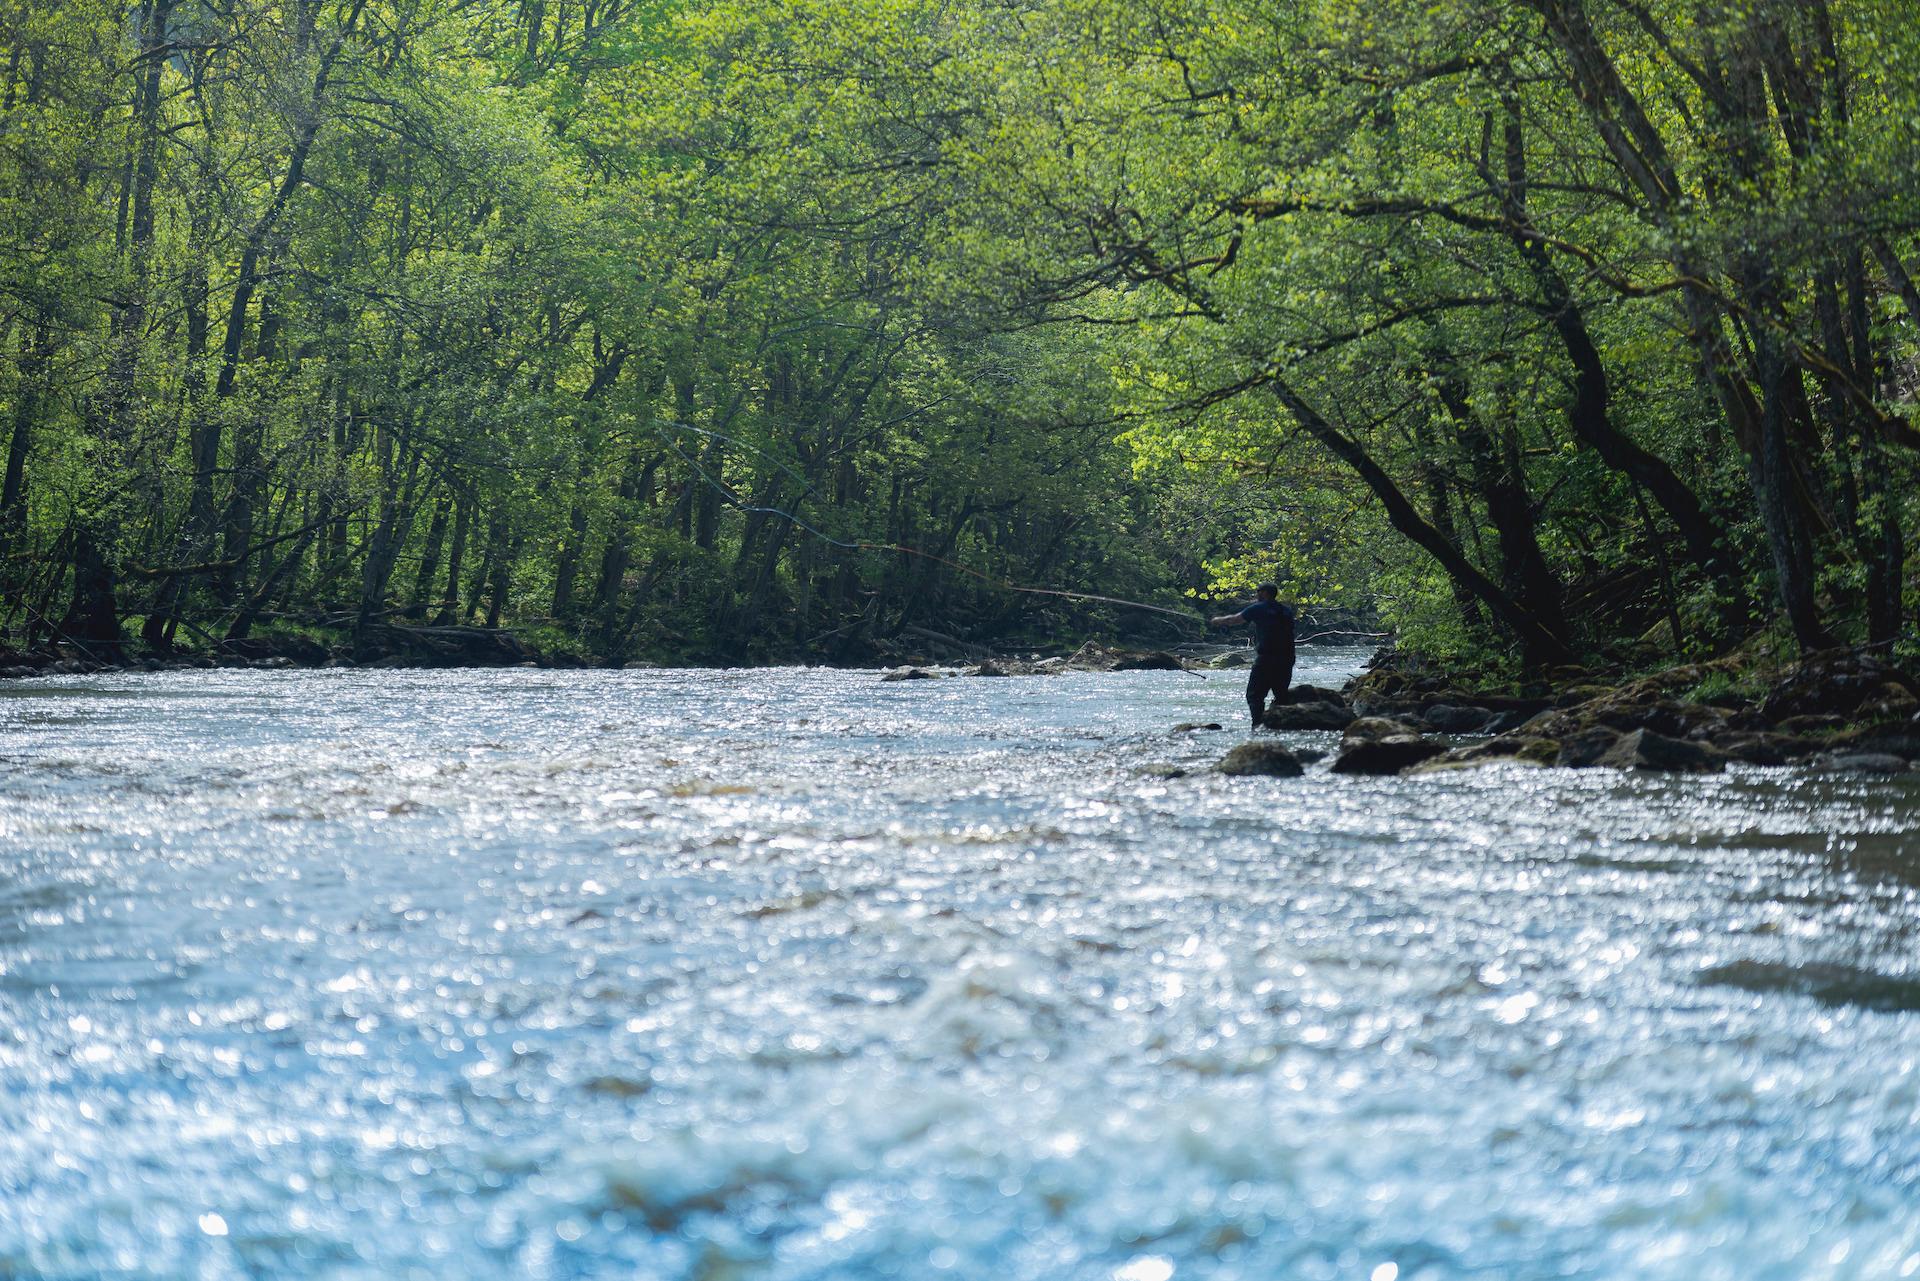 A person is fly fishing in Örekil River. The river is surrounded by greenery.